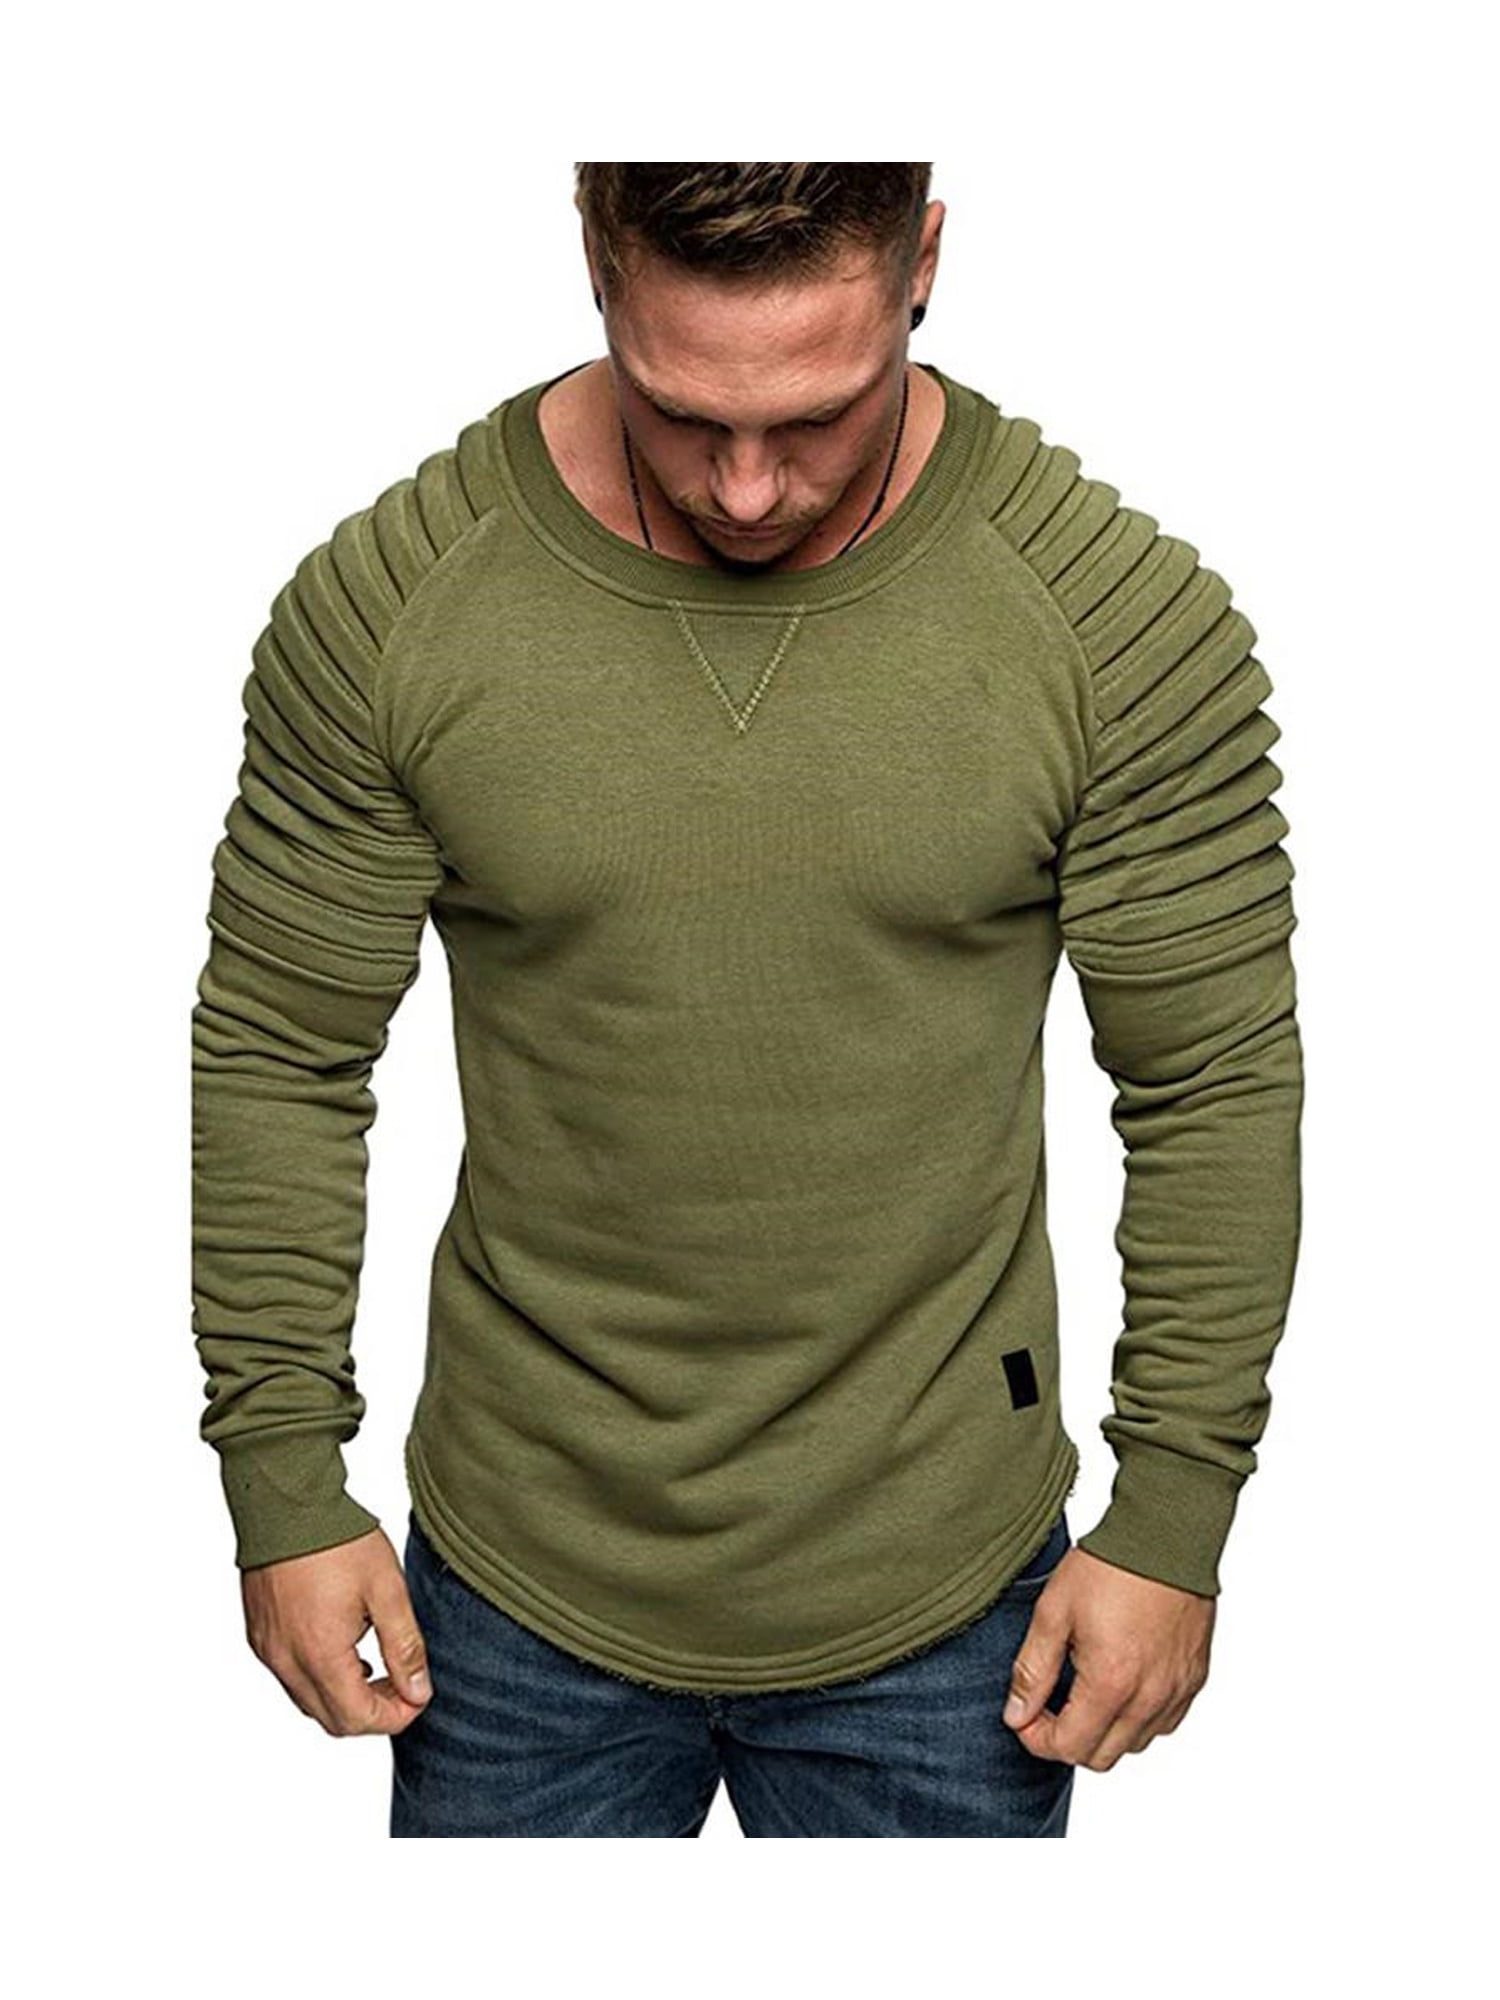 Men Slim Athletic Gym Muscle Hoodies Pullover Jumper Tops Sports Sweater Casual 